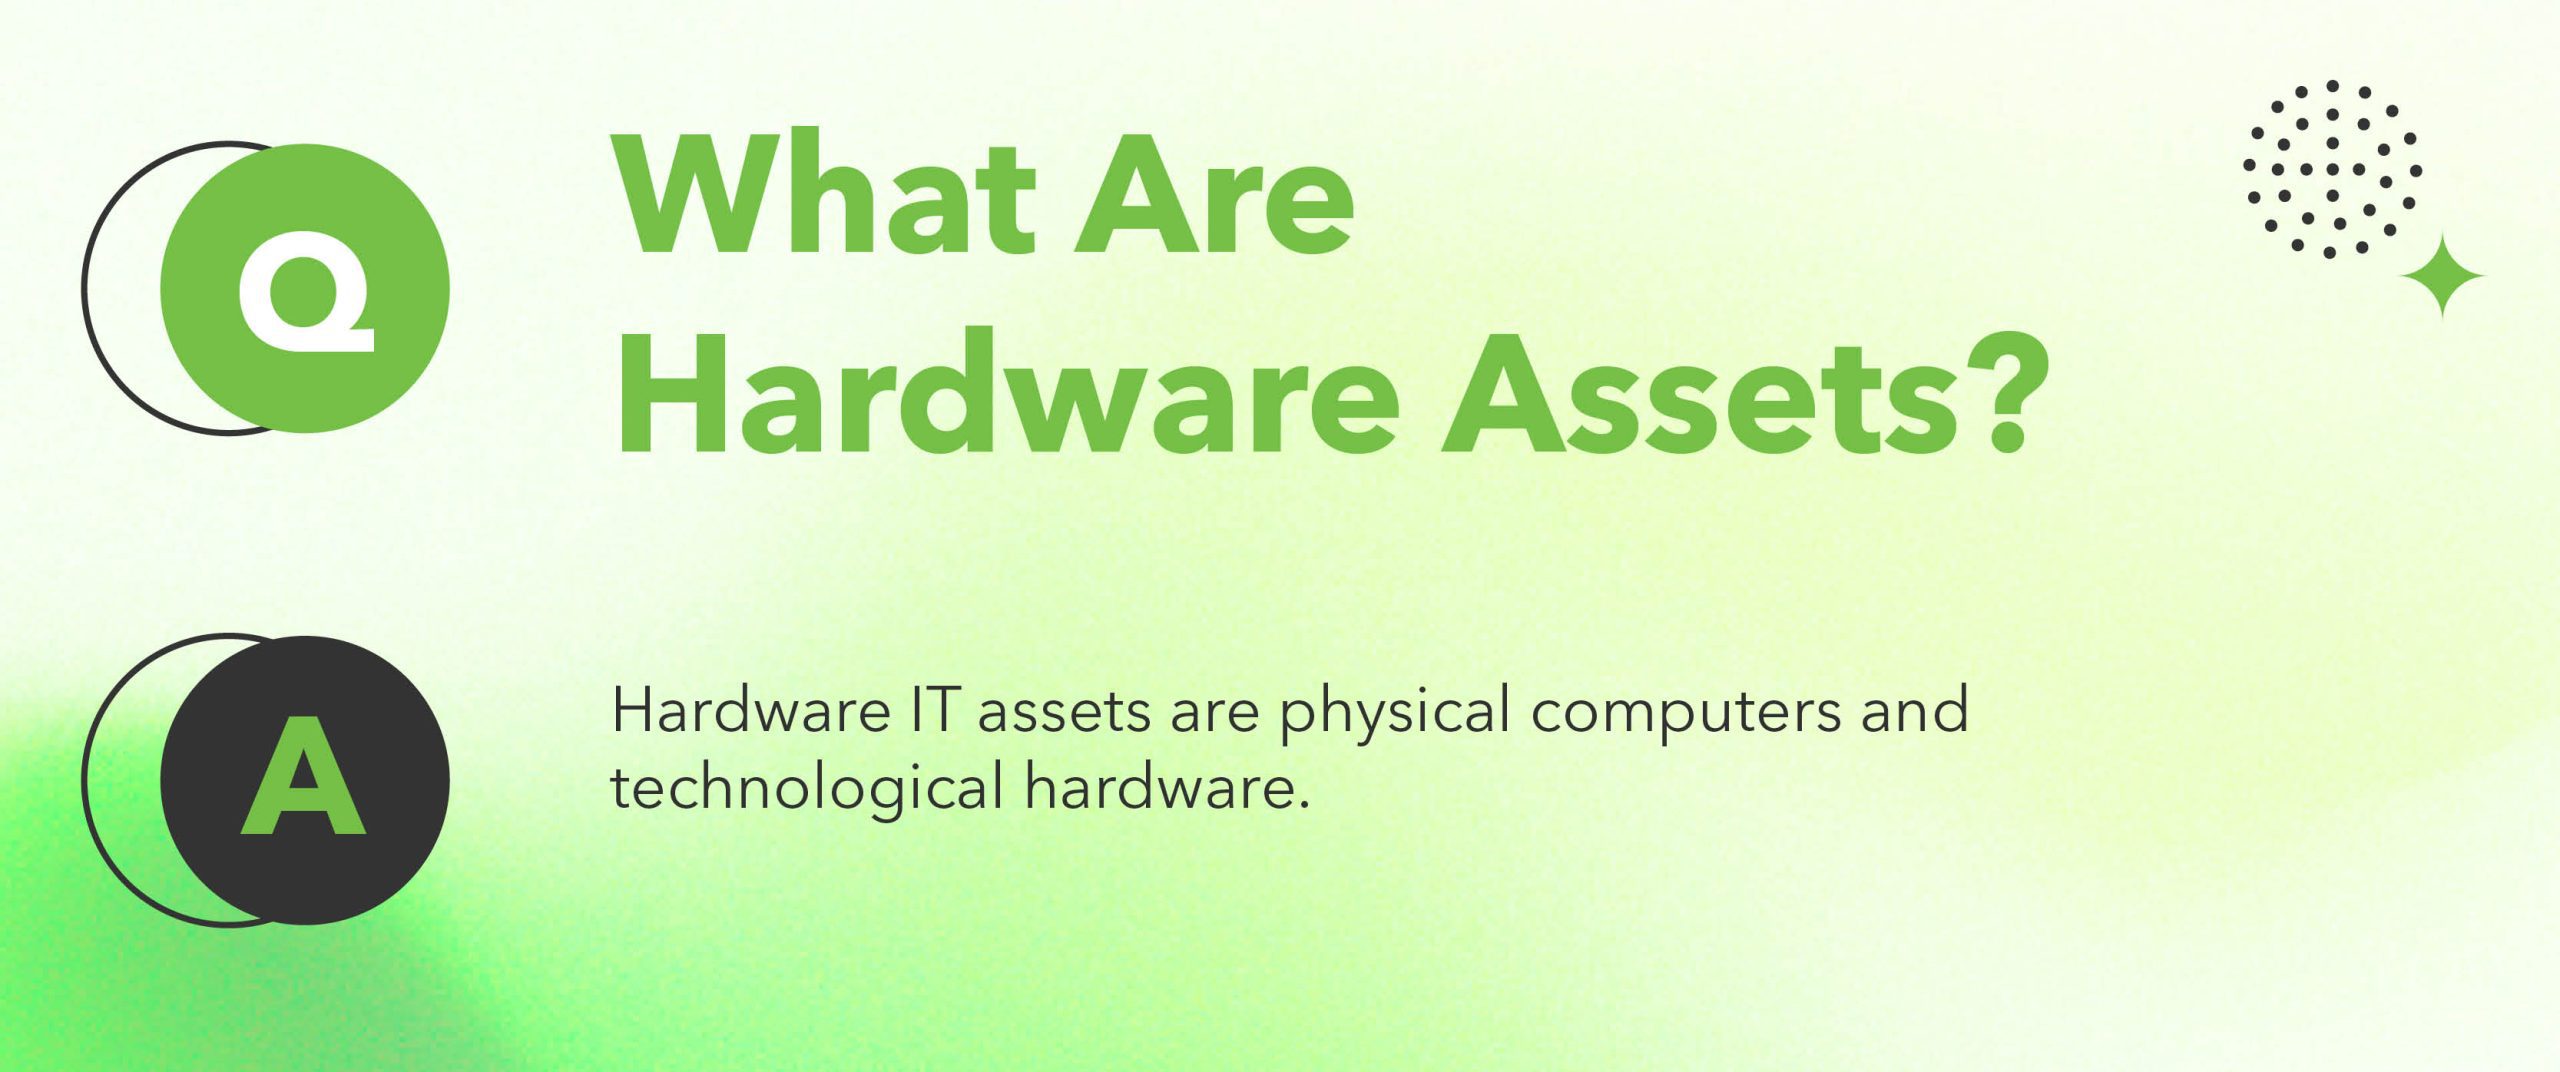 what are hardware assets?